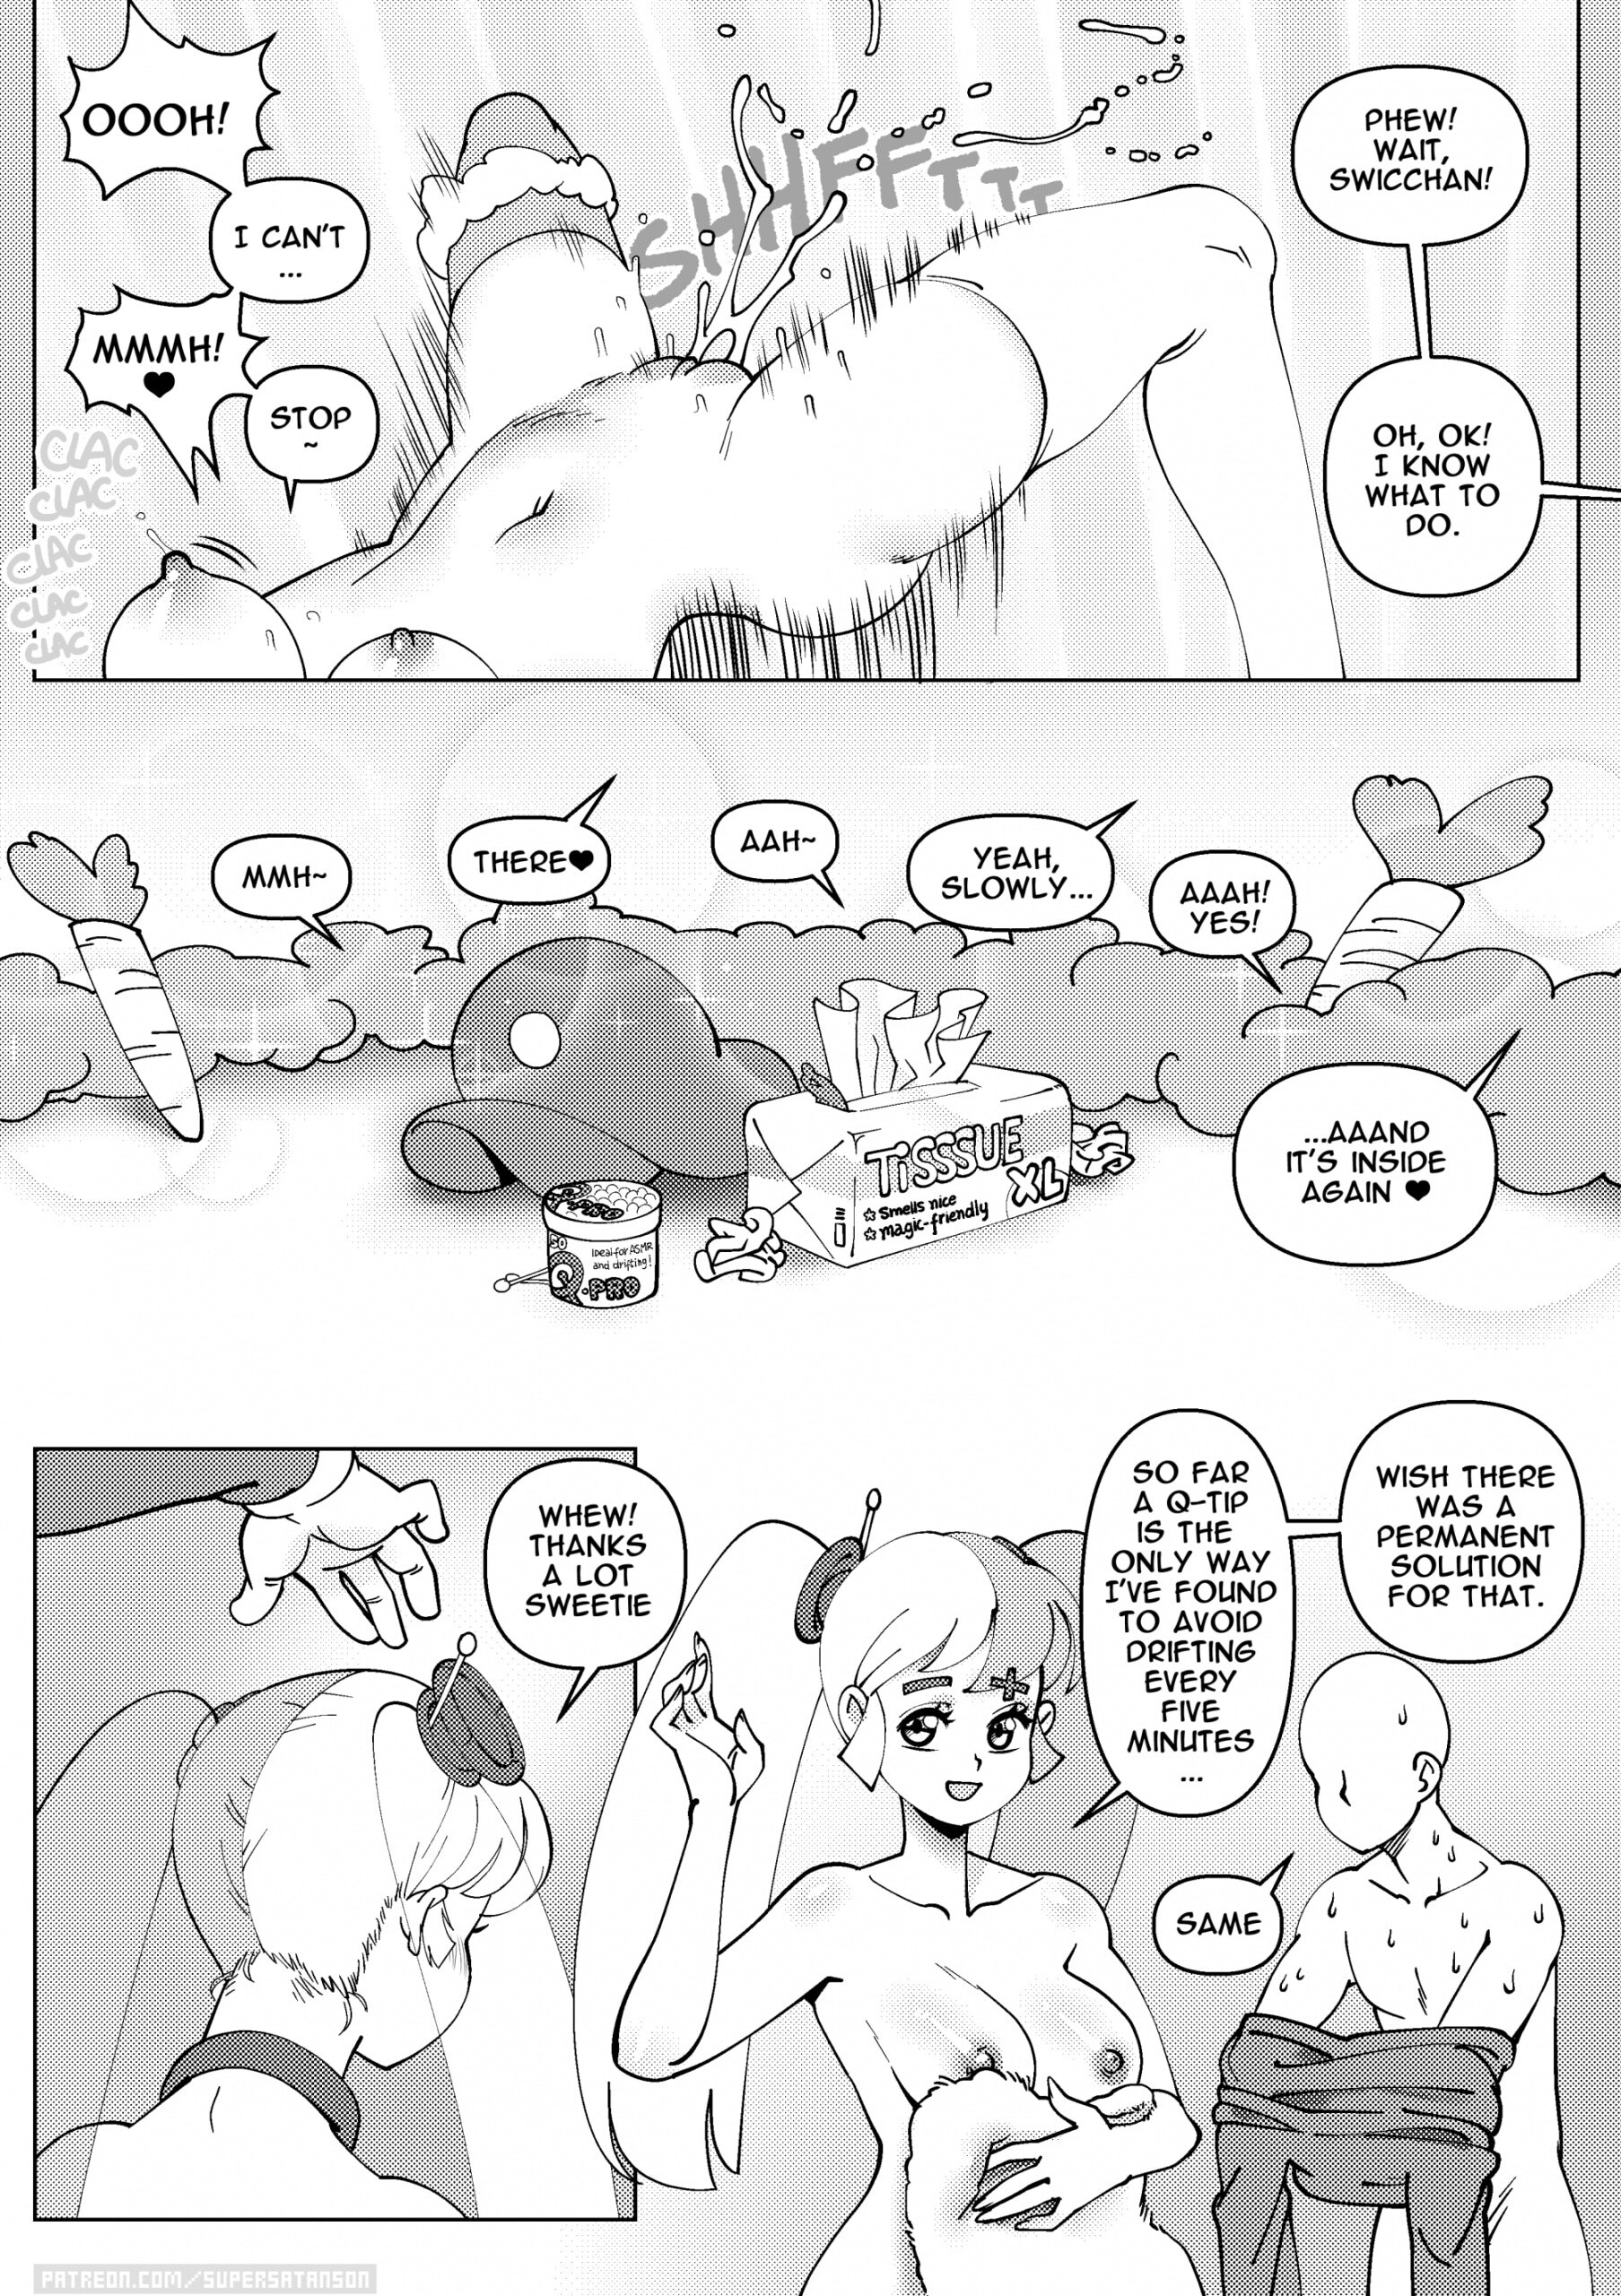 Swicchan Happy Easter! - Page 12